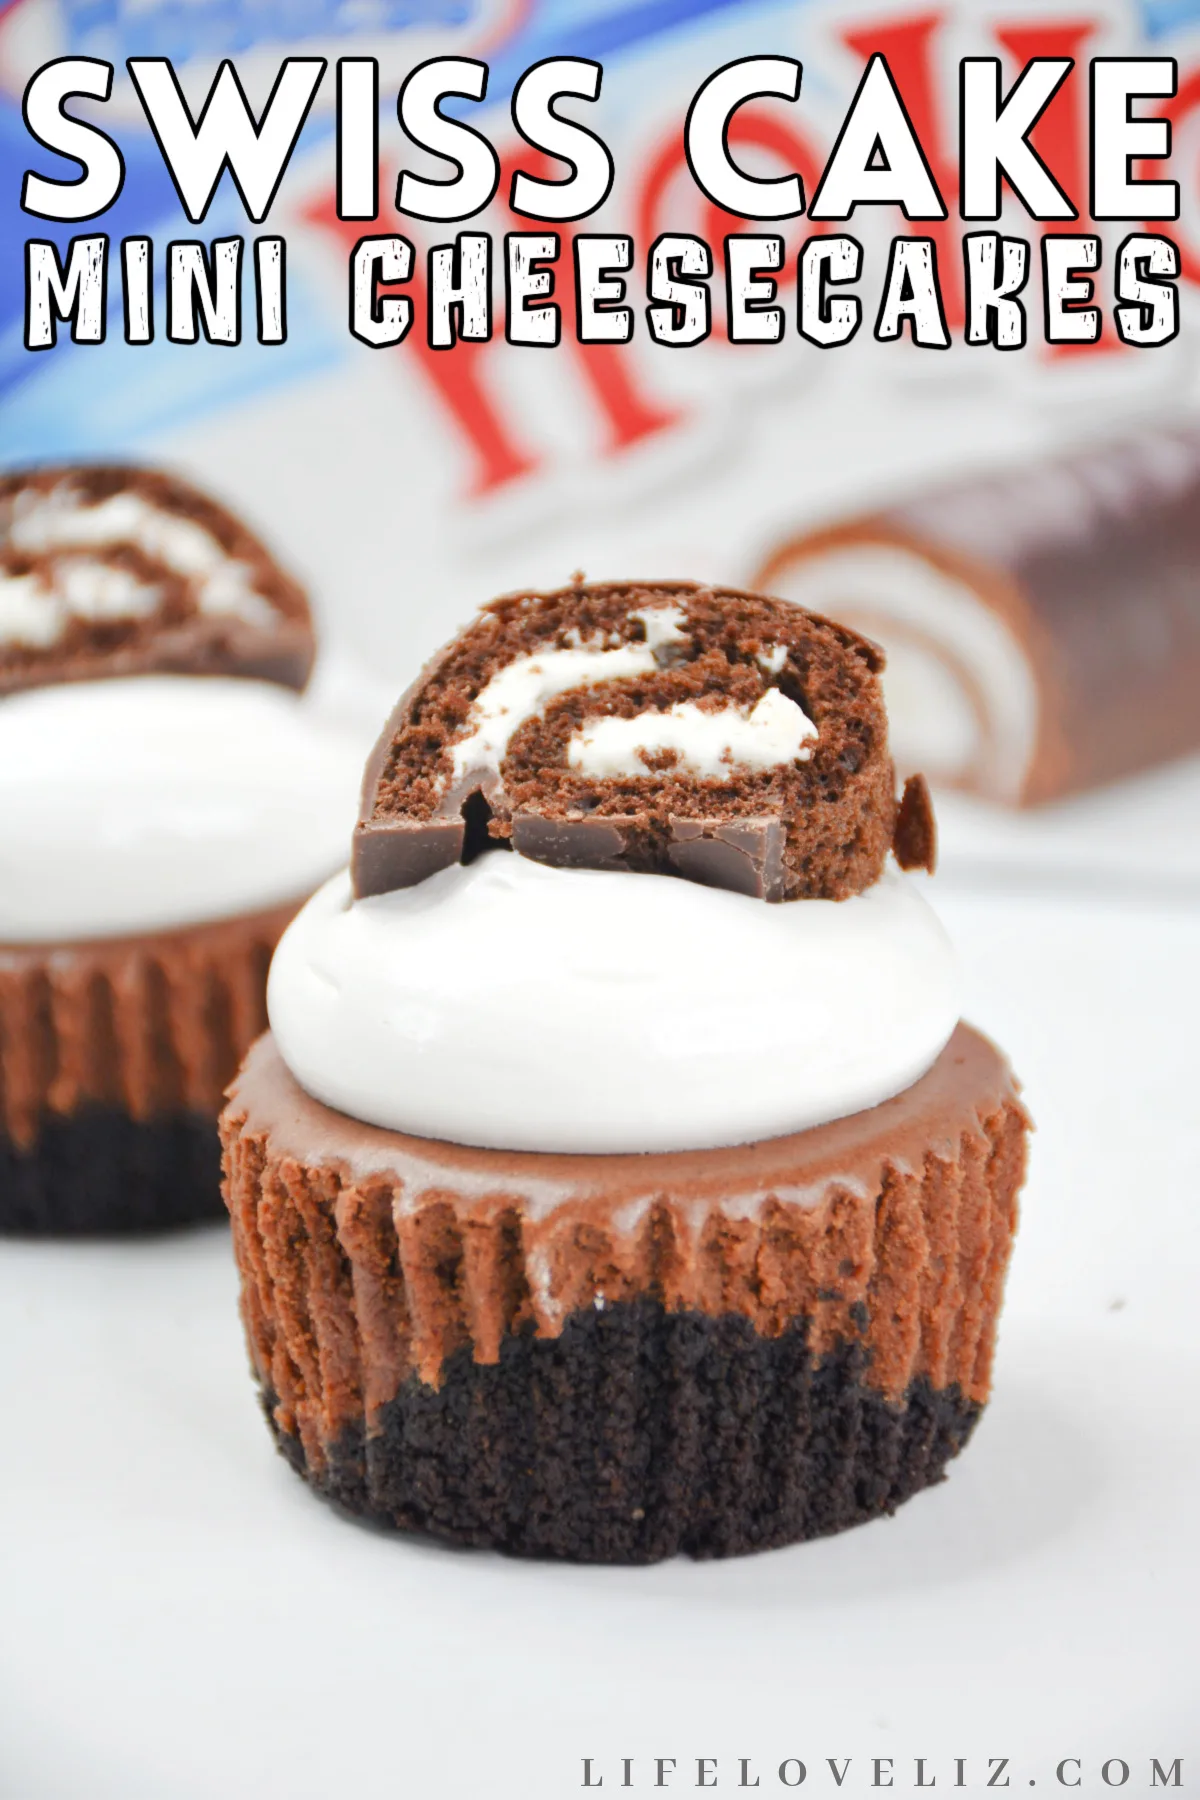 Mini chocolate Swiss roll cheesecakes are irresistible individual desserts featuring chocolate cheesecake and fluffy marshmallow frosting!